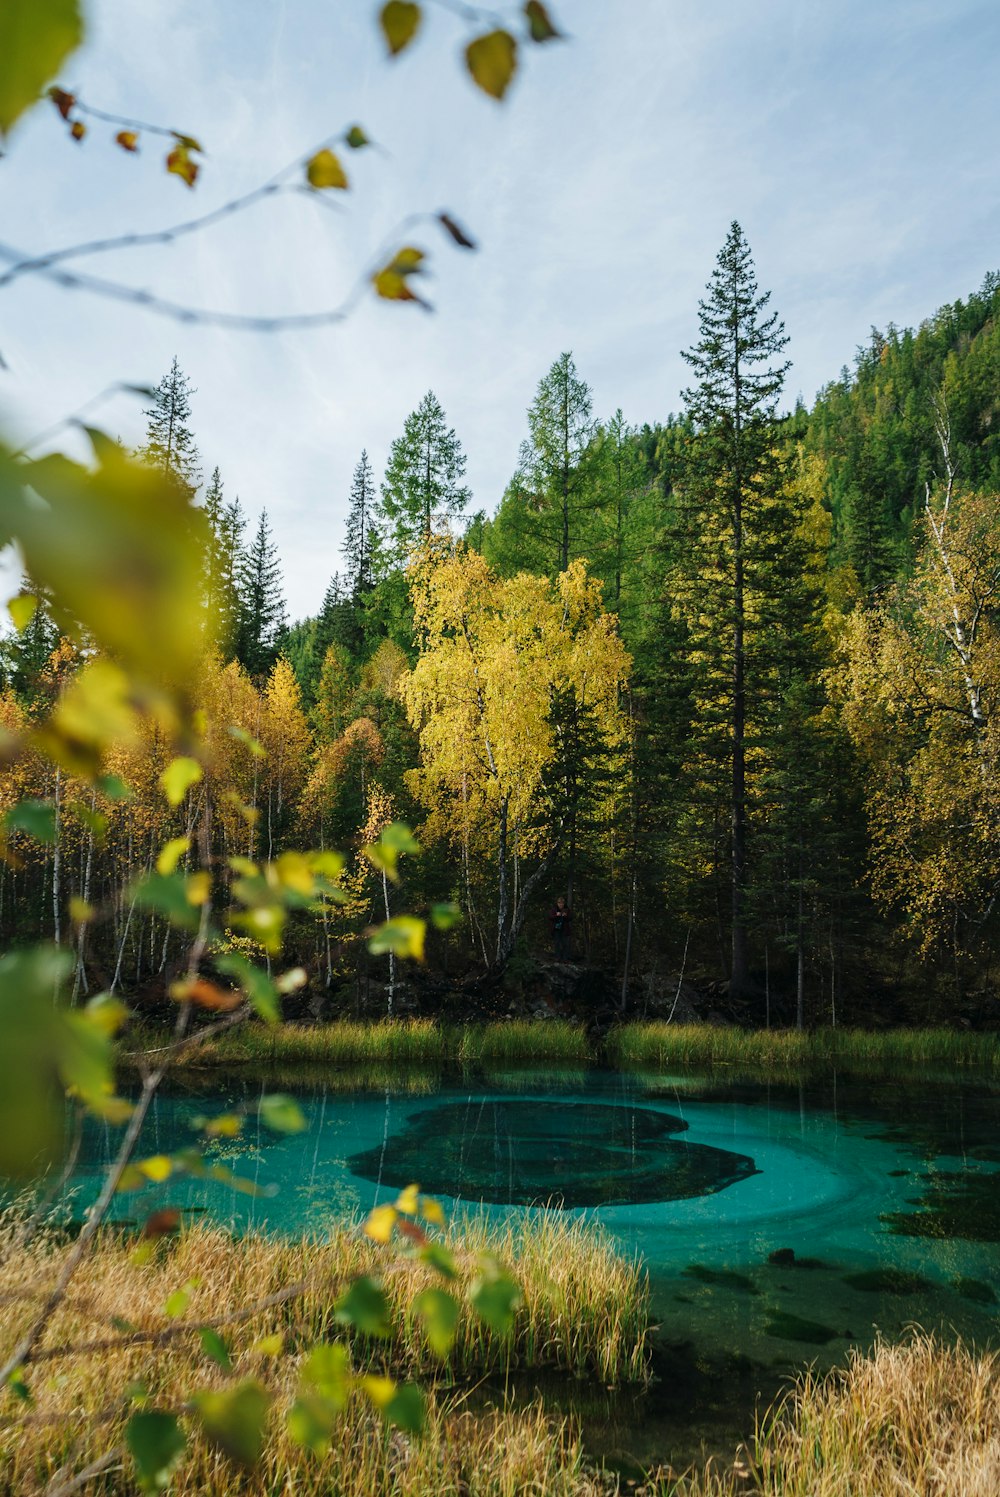 a blue pond surrounded by trees in a forest